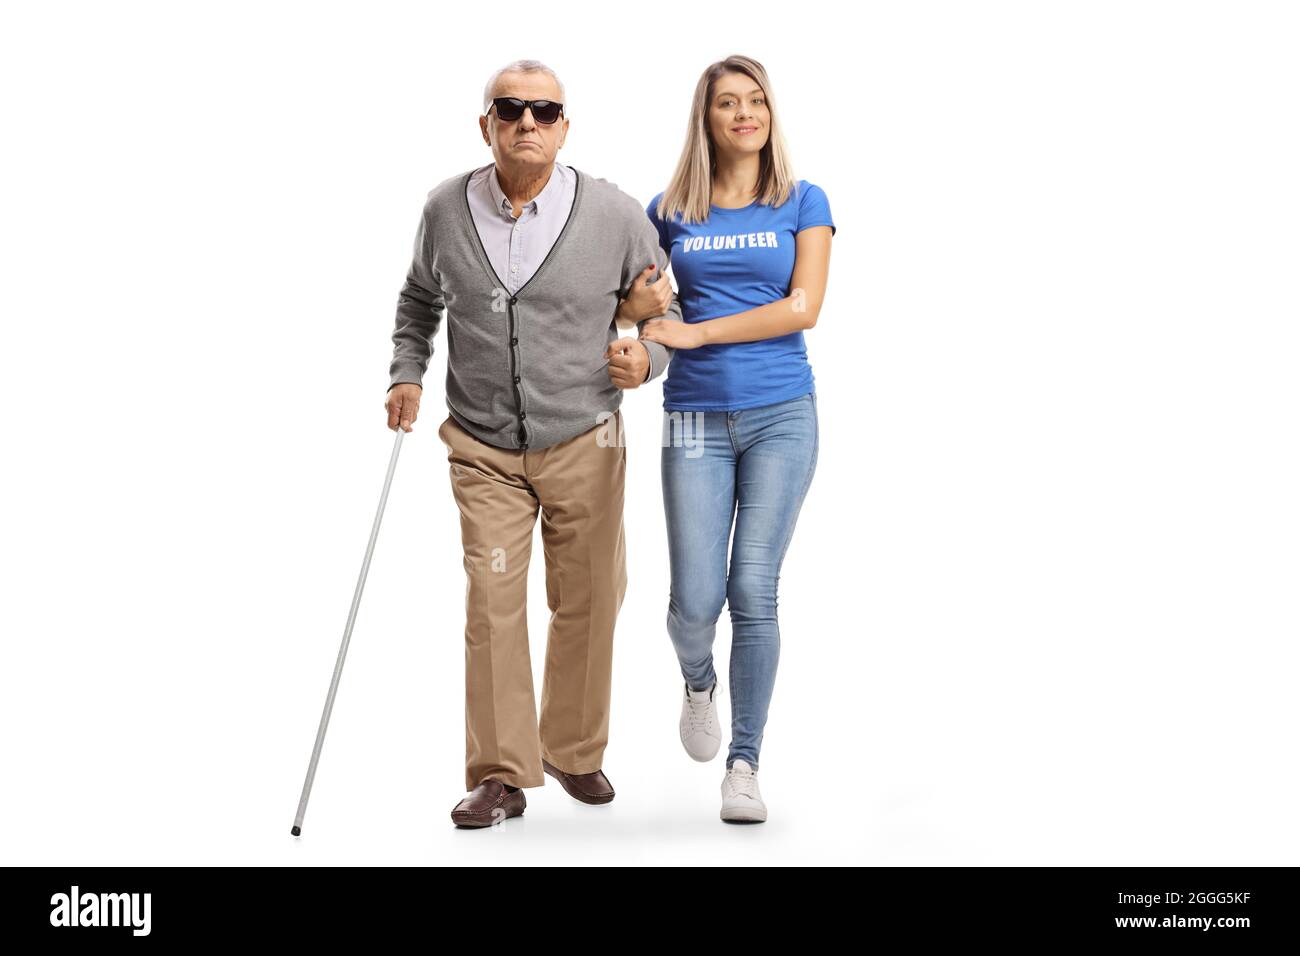 Full length portrait of a young female volunteer helping an elderly blind man walking with a cane isolated on white background Stock Photo